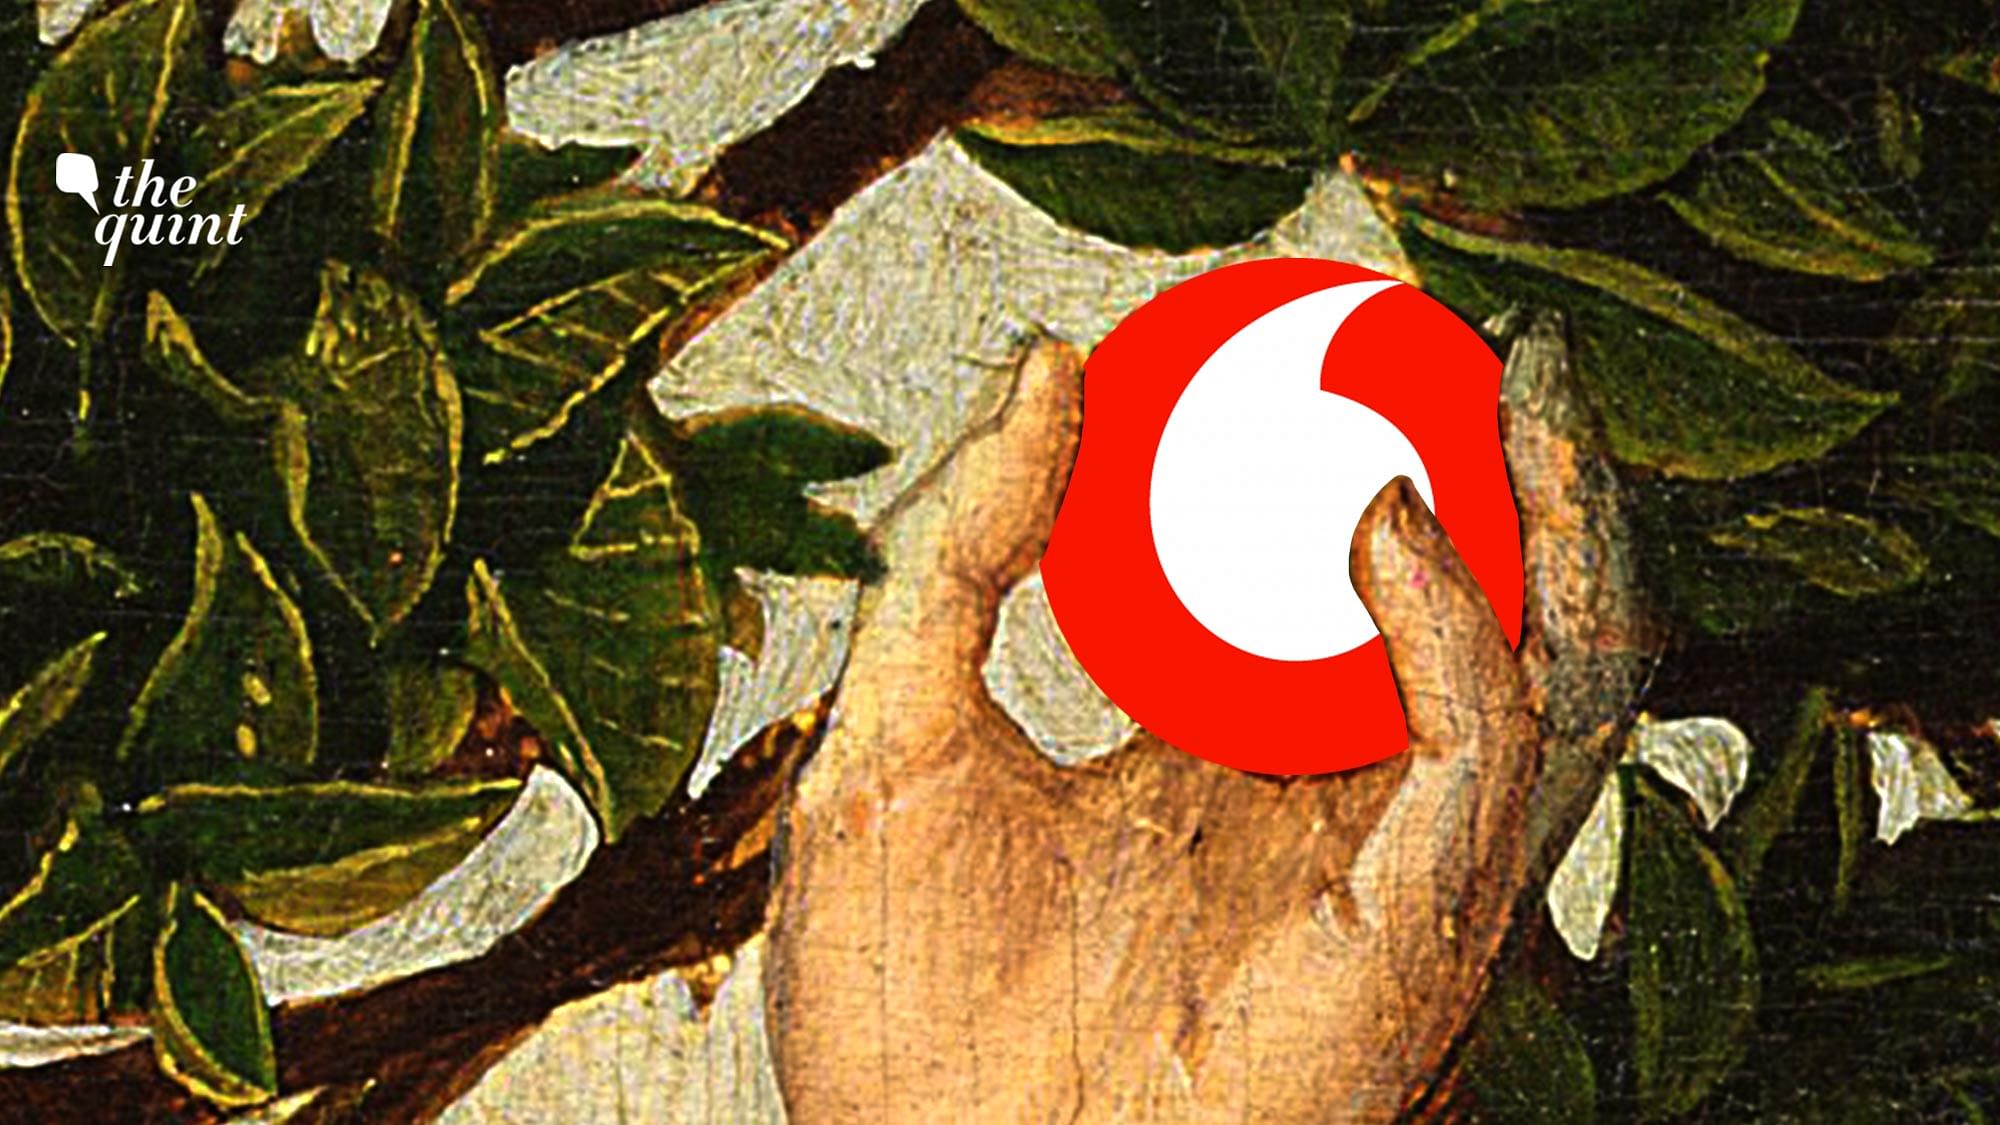 ‘Biblical’ ‘Forbidden Fruit’ referential image, and Vodafone logo used for representational purposes.